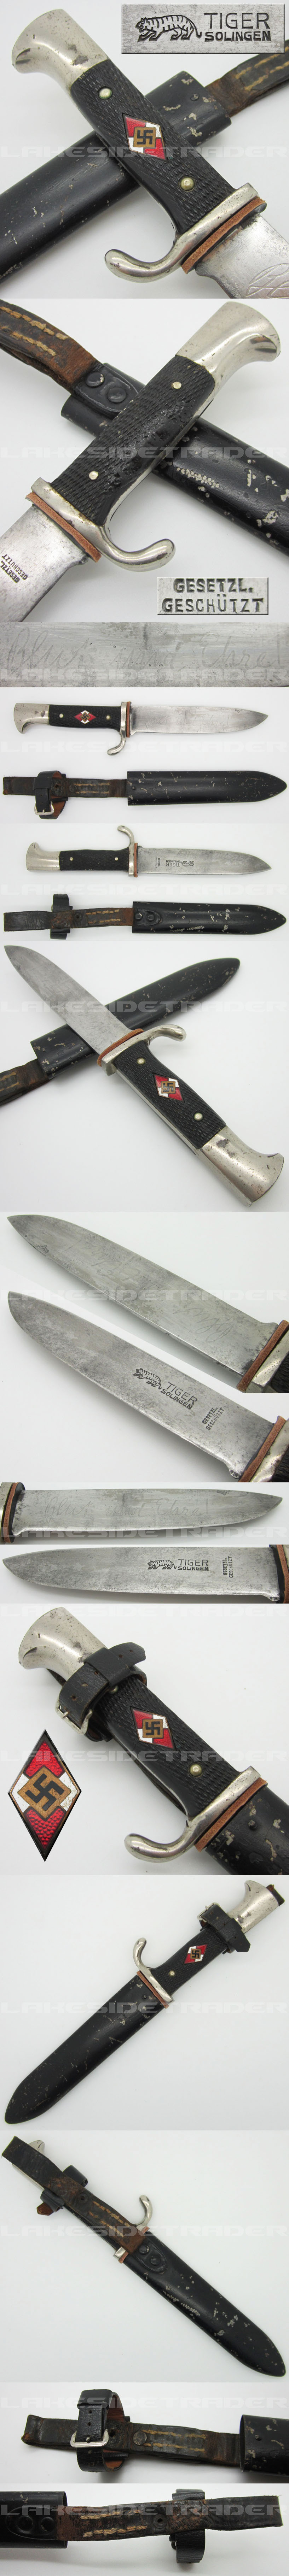 Early Hitler Youth Dagger by Tiger